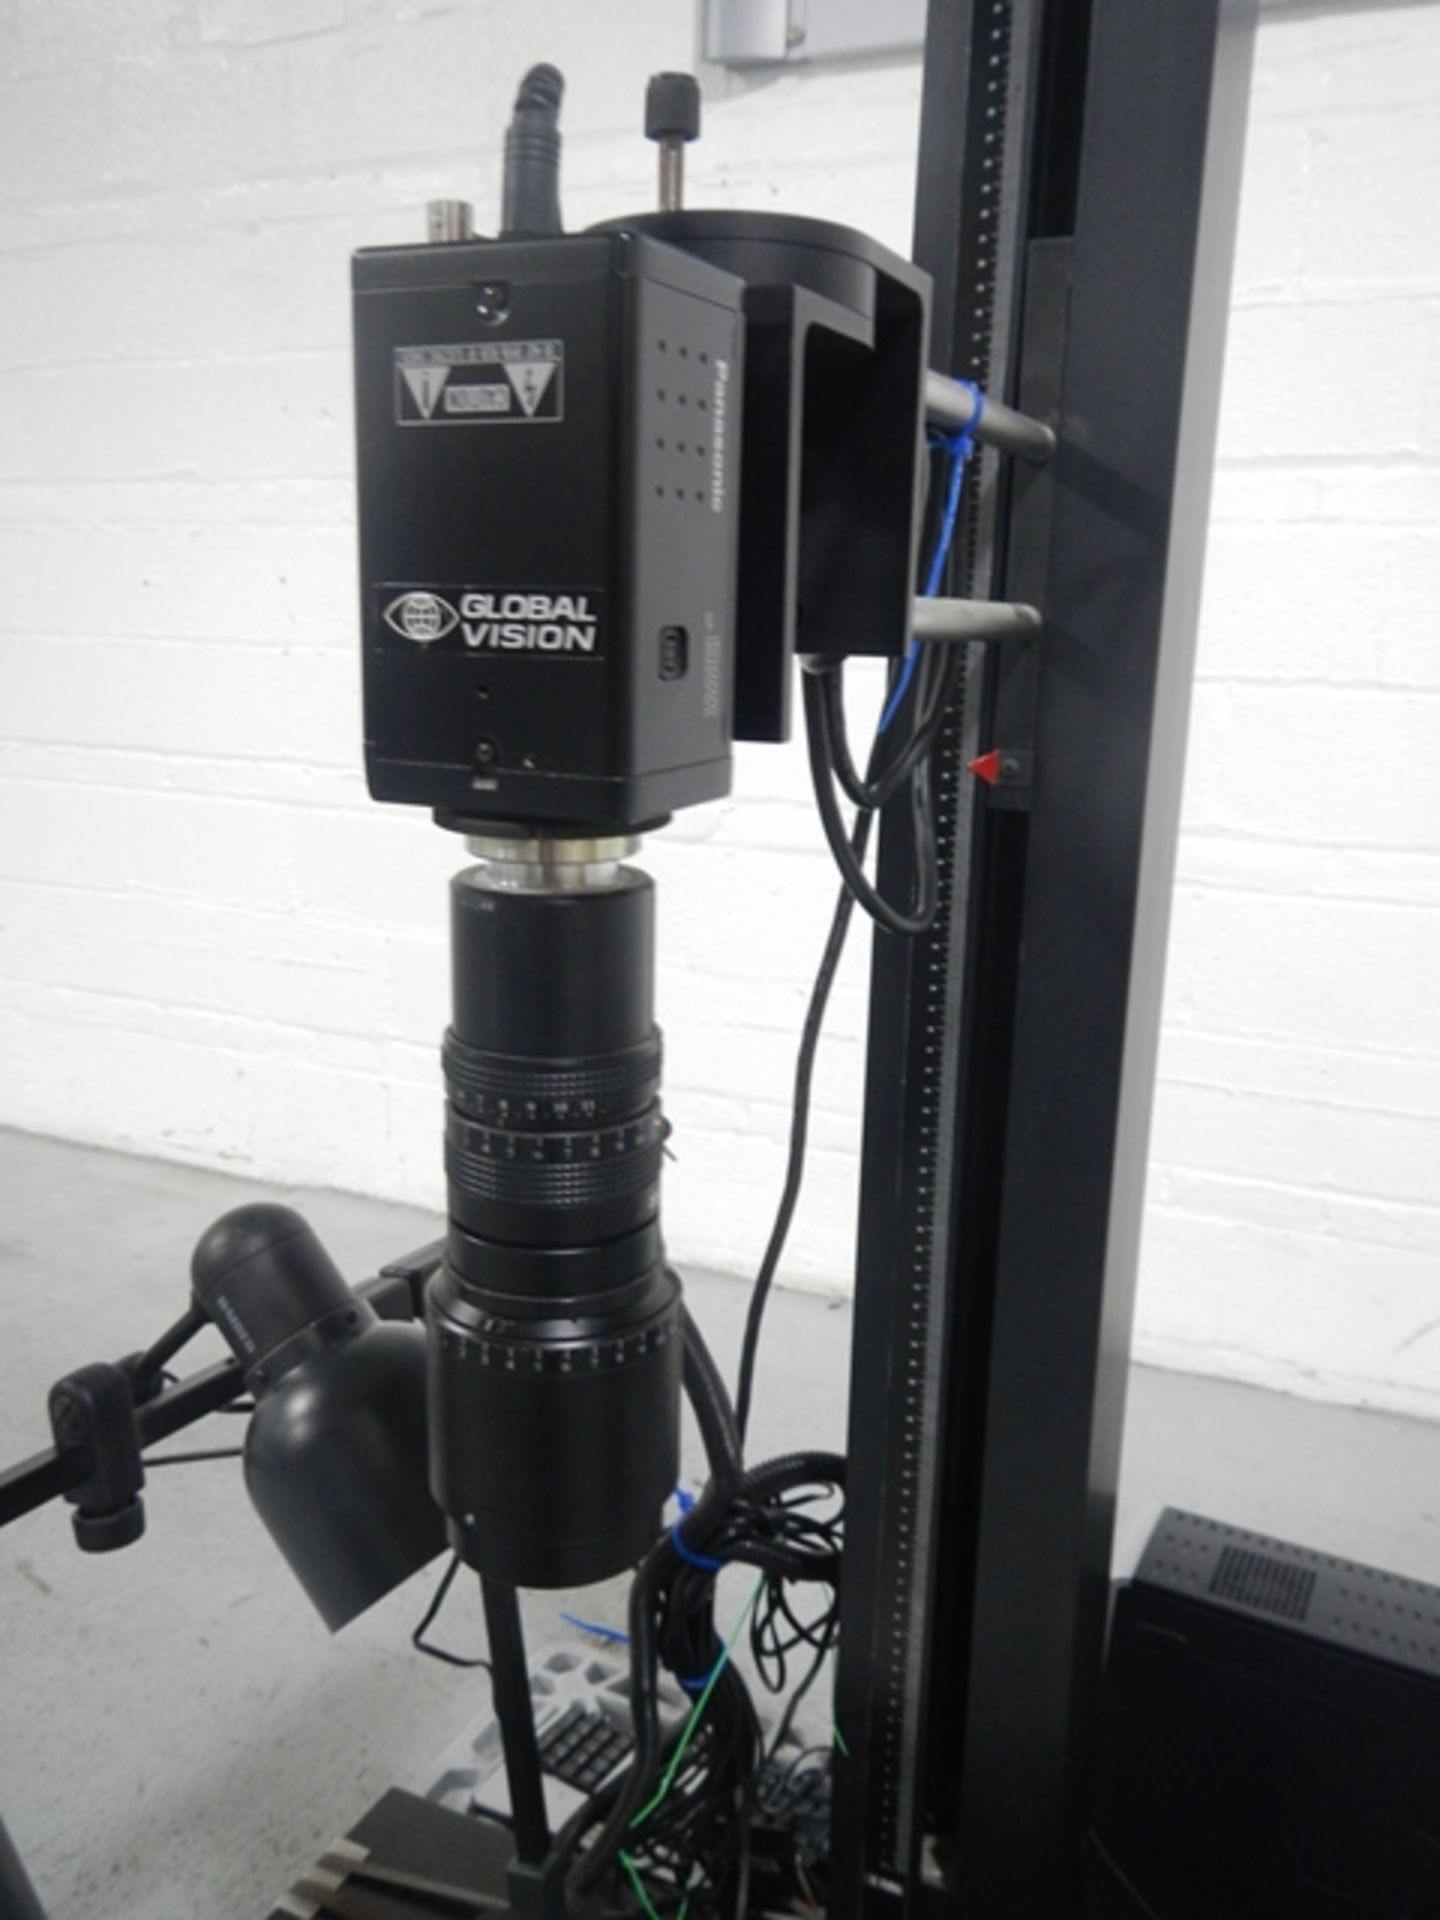 Global Vision inspection system with Panasonic camera. - Image 5 of 6